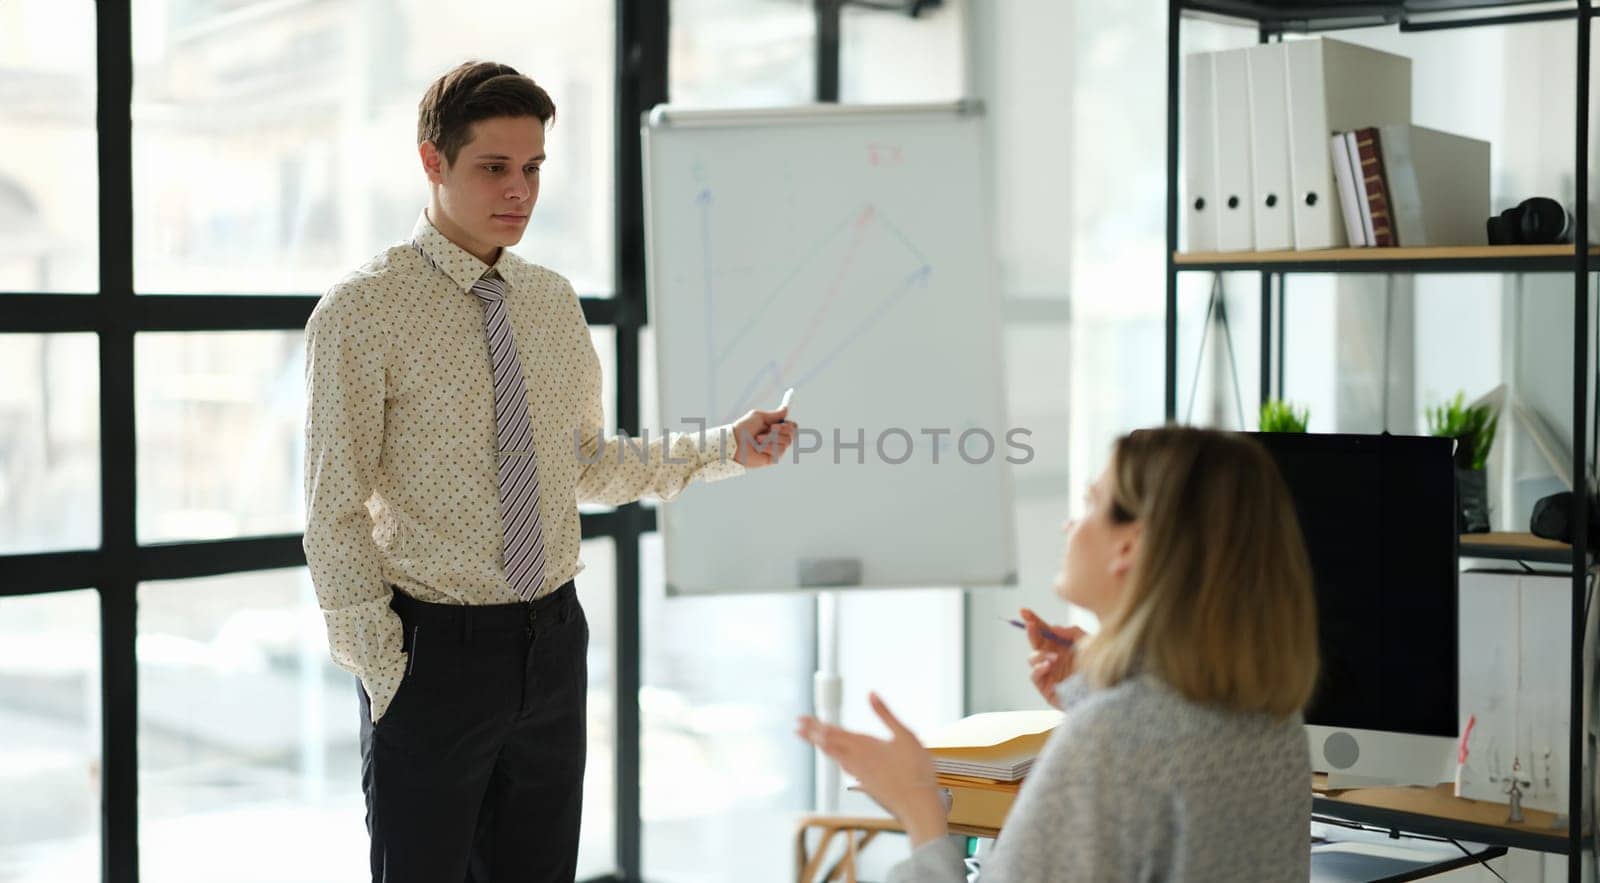 Business coach showing charts on blackboard to student in office. Business education concept